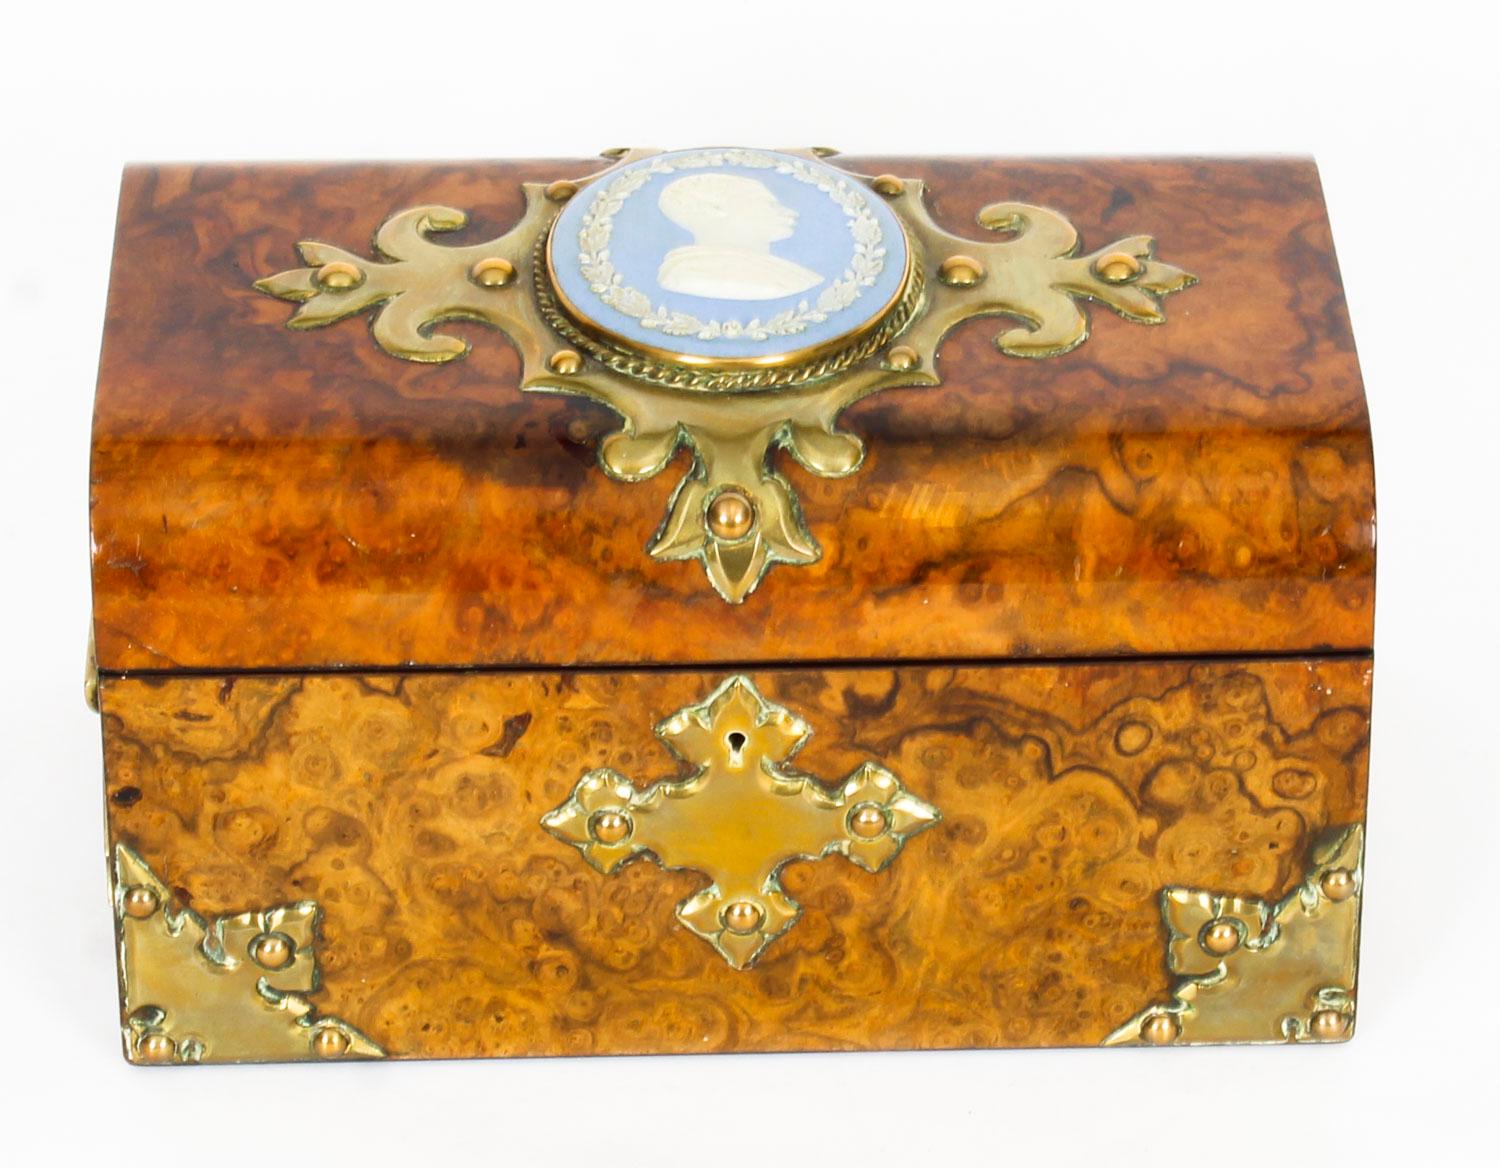 This is a lovely antique Victorian 19th century porcelain and ormolu-mounted burr walnut dome top casket, circa 1870 in date.
 
The casket has a superb inset scrolling brass cartouche inset with an oval Jasper Ware porcelain plaque of a gentleman